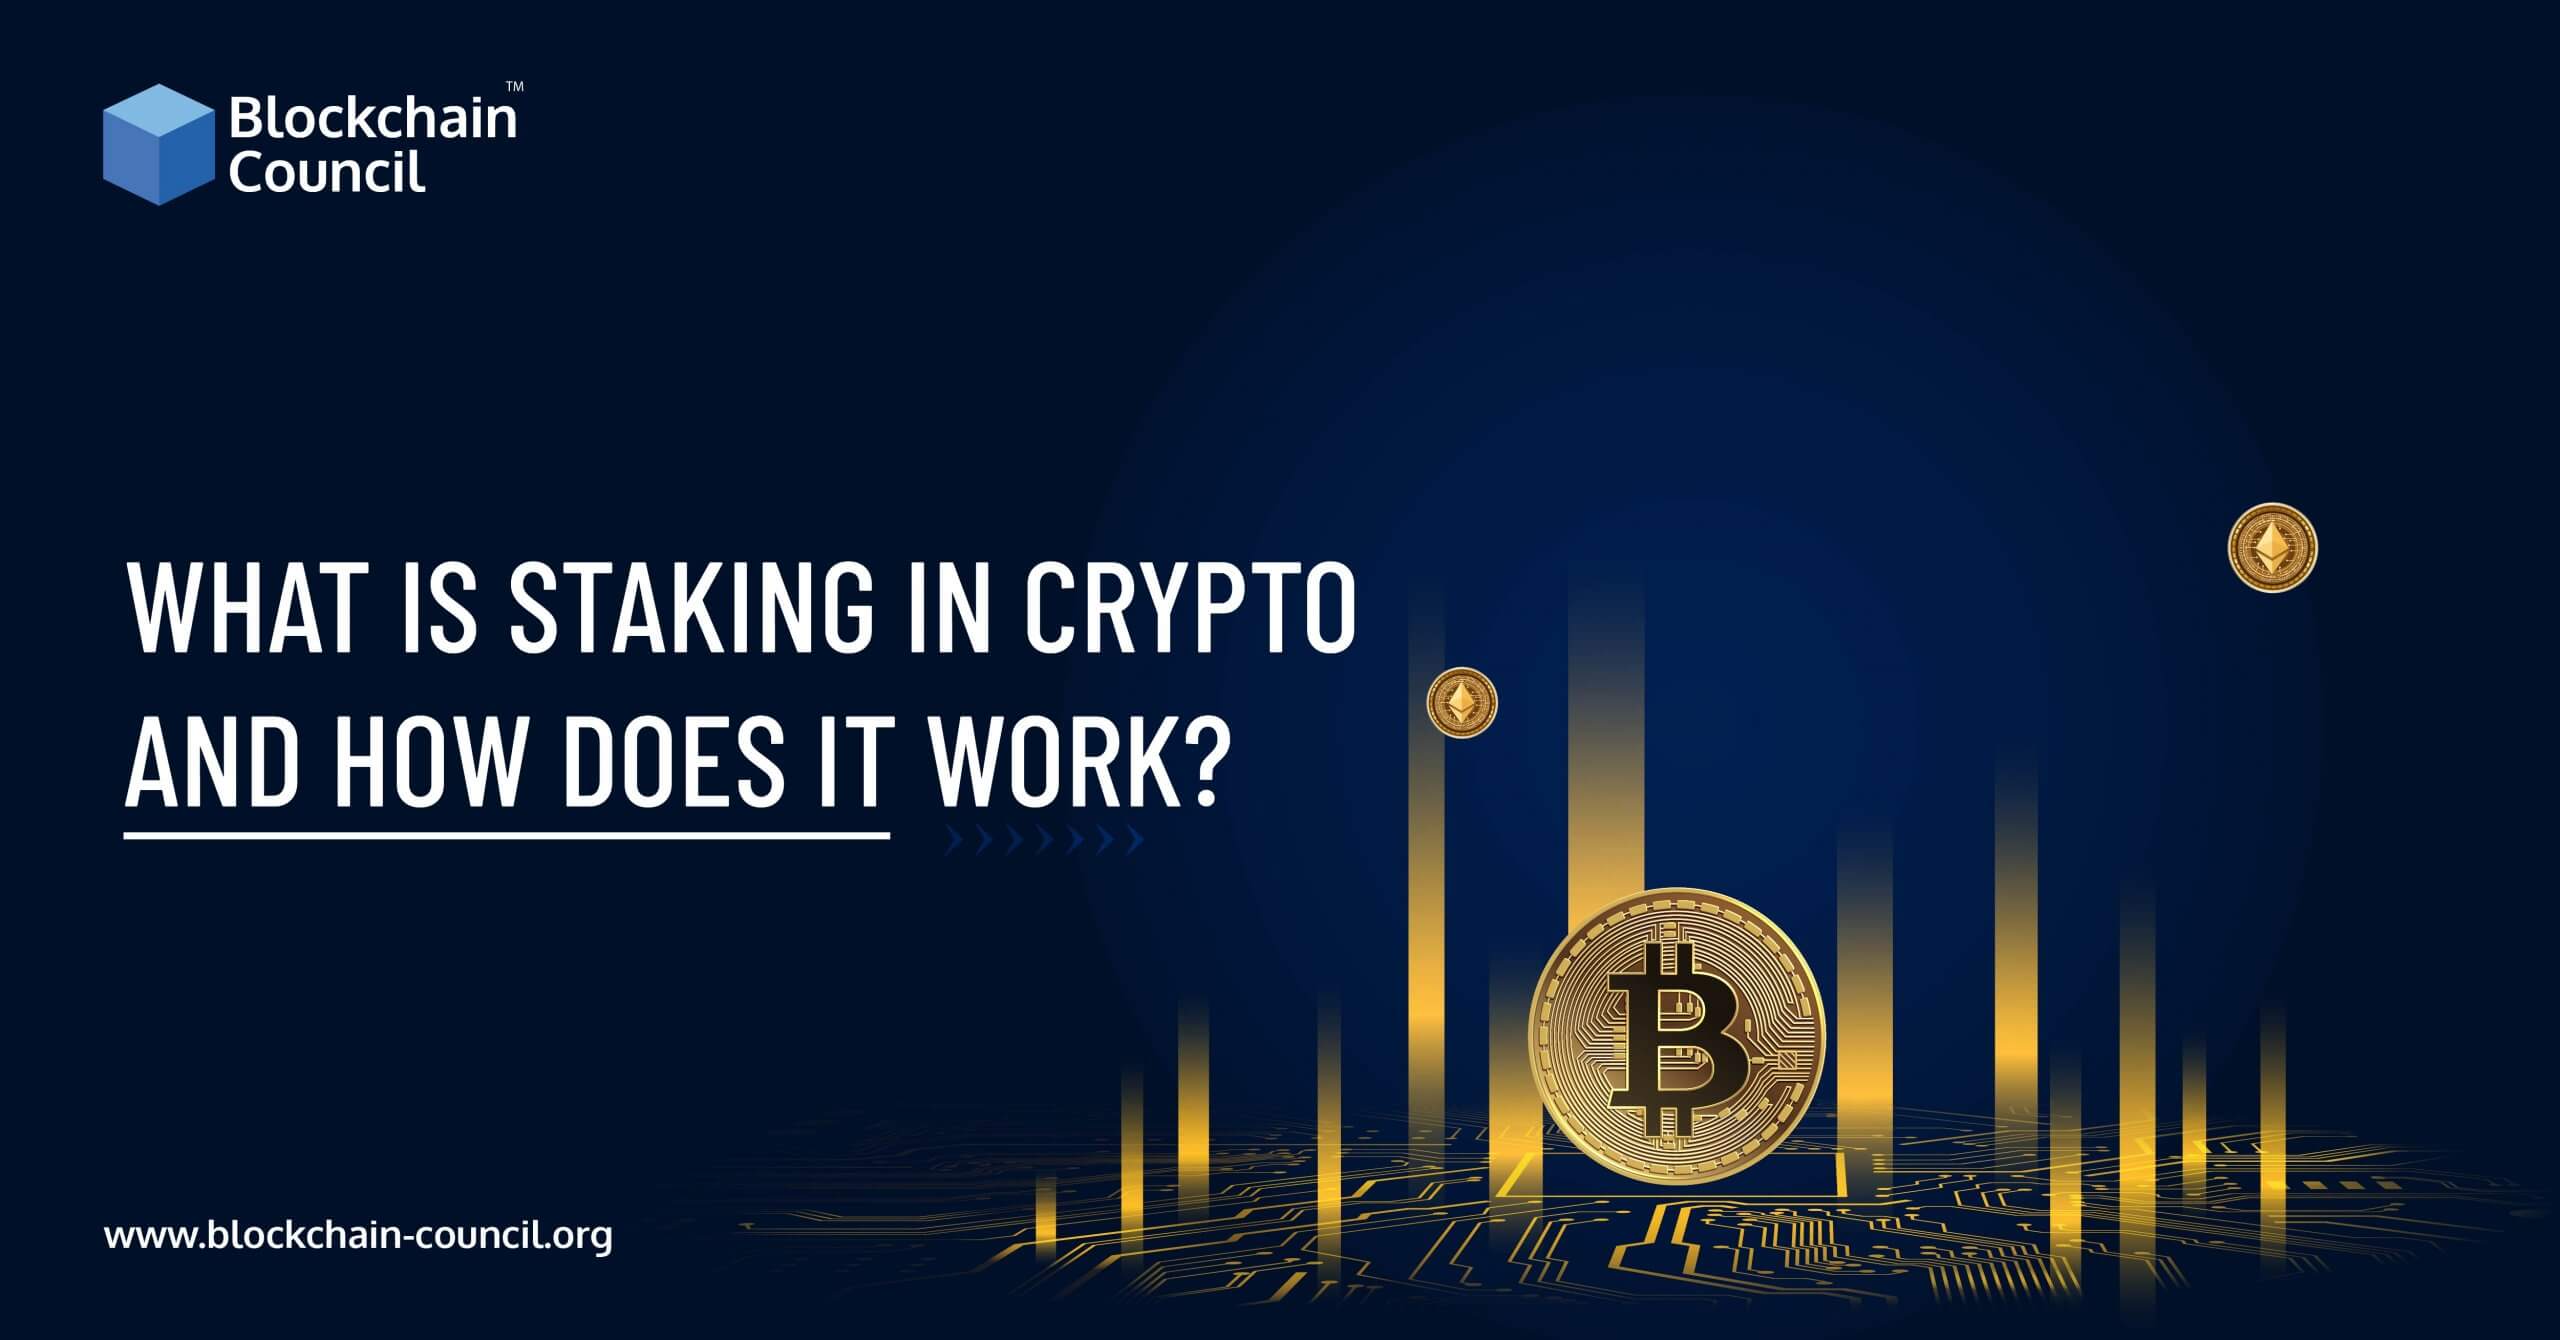 What is Staking in crypto and how does it work